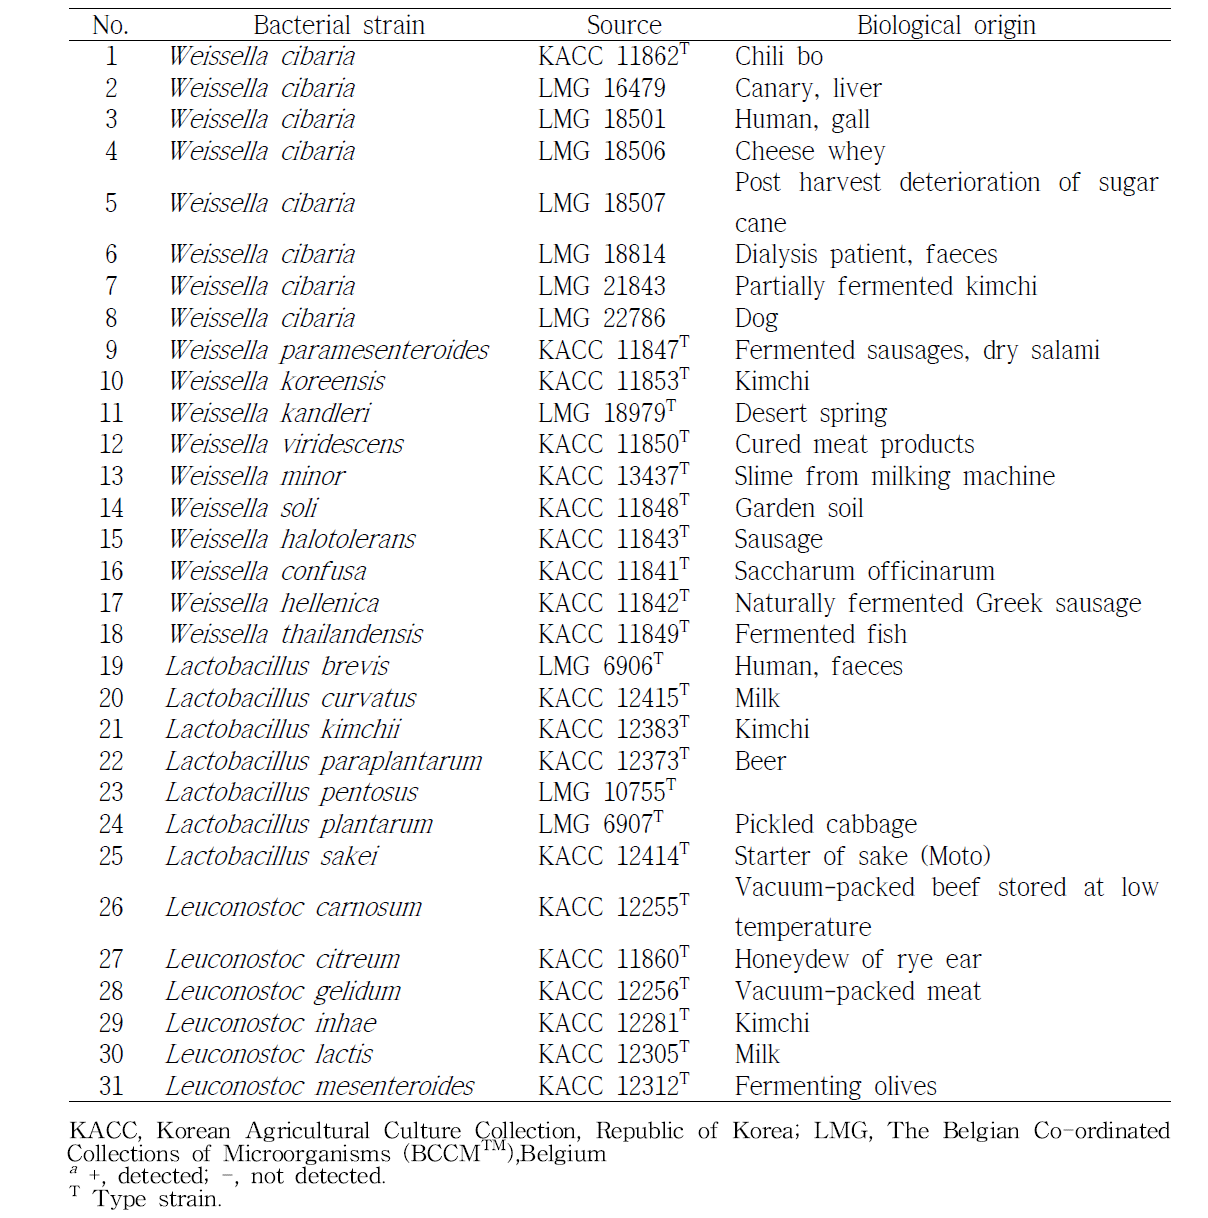 Bacterial strains used in the PCR specificity test